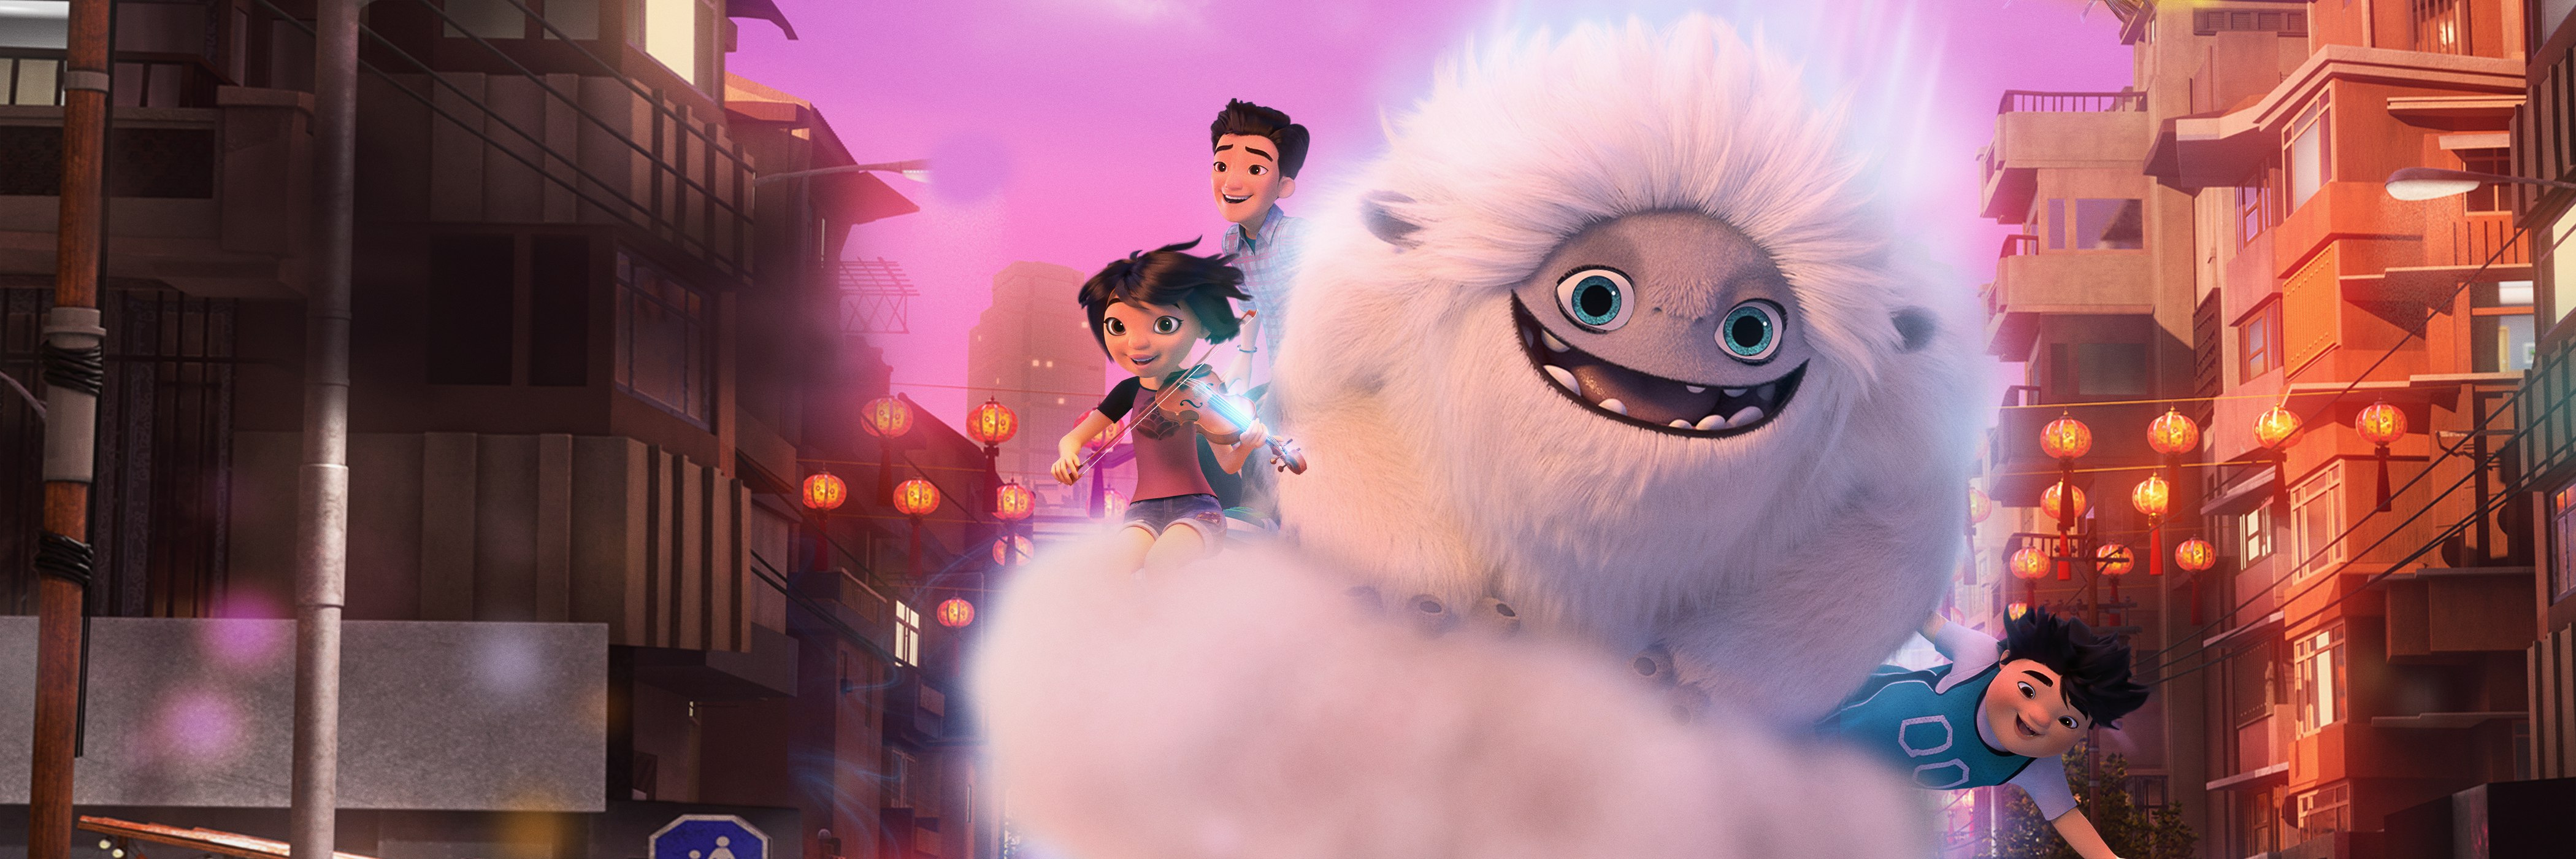 The Abominable Snow Baby: release date, cast, plot, trailer | What to Watch